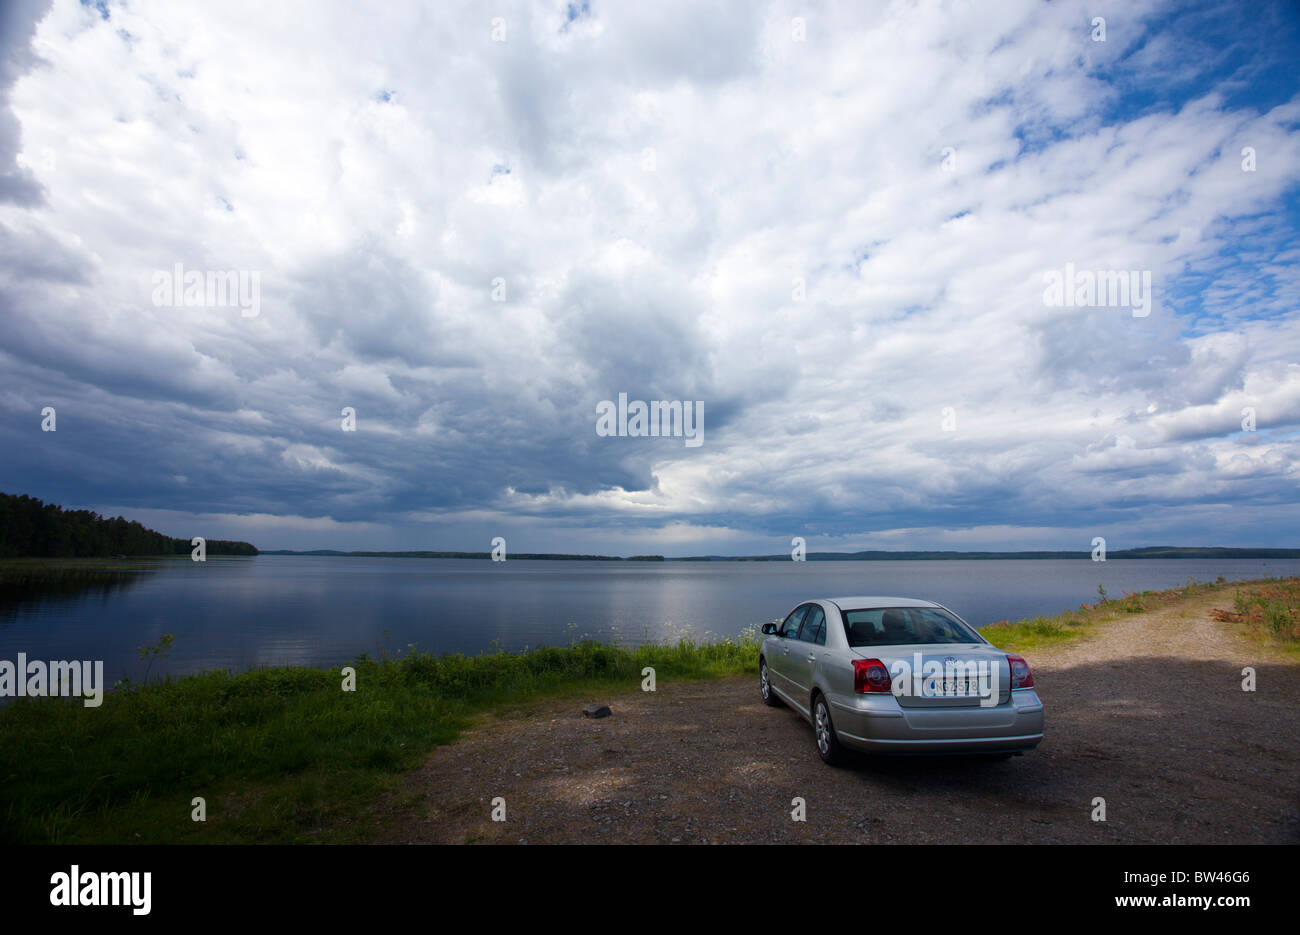 Toyota Avensis 2007 2.2 D4D diesel model parked at lake shore , Finland Stock Photo